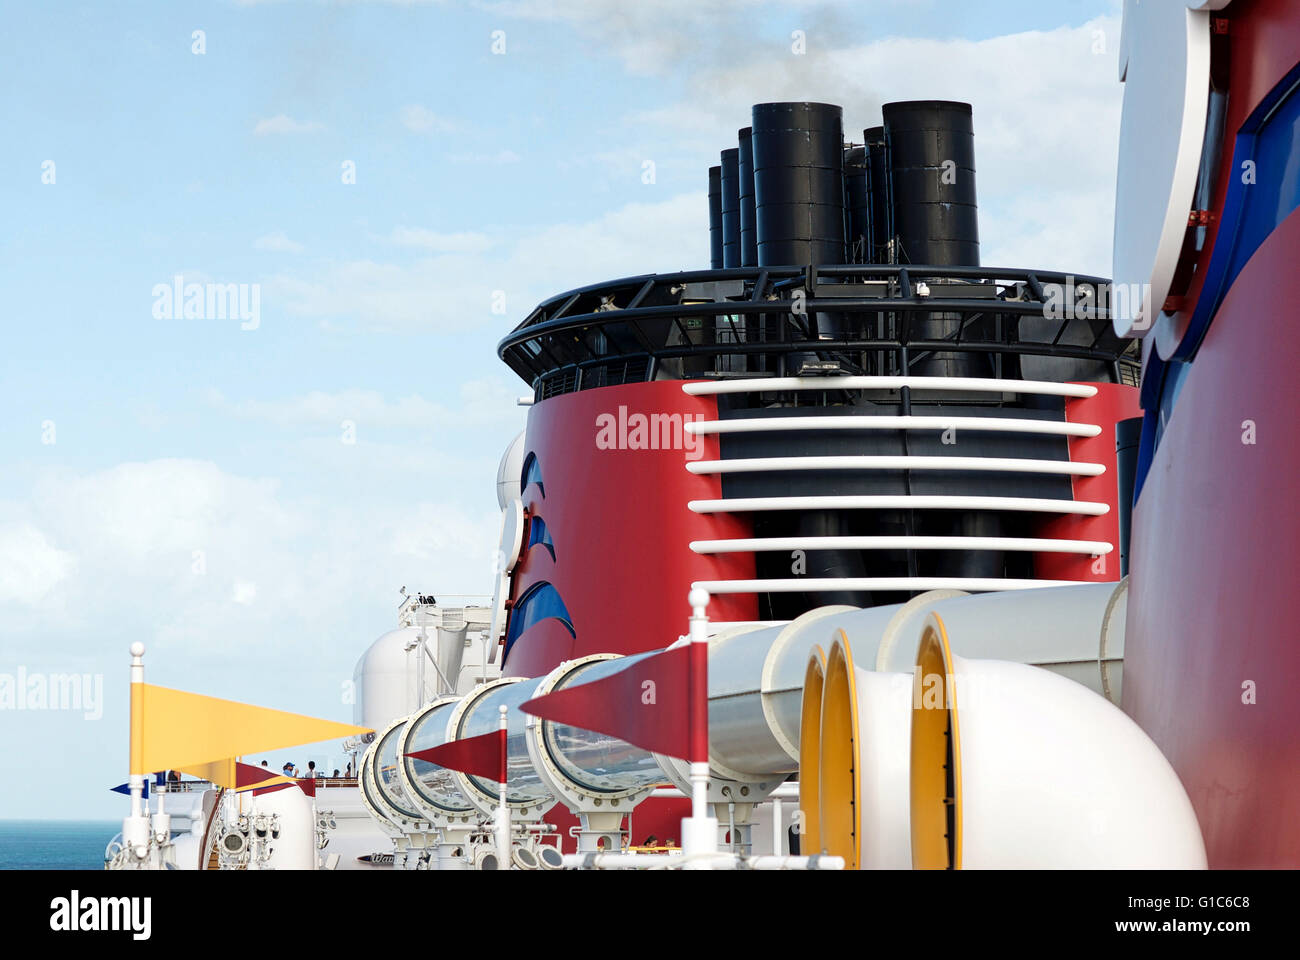 Close-up image of the smokestack of the Disney Dream cruise ship and AquaDuck during a cruise between the U.S. and The Bahamas. Stock Photo